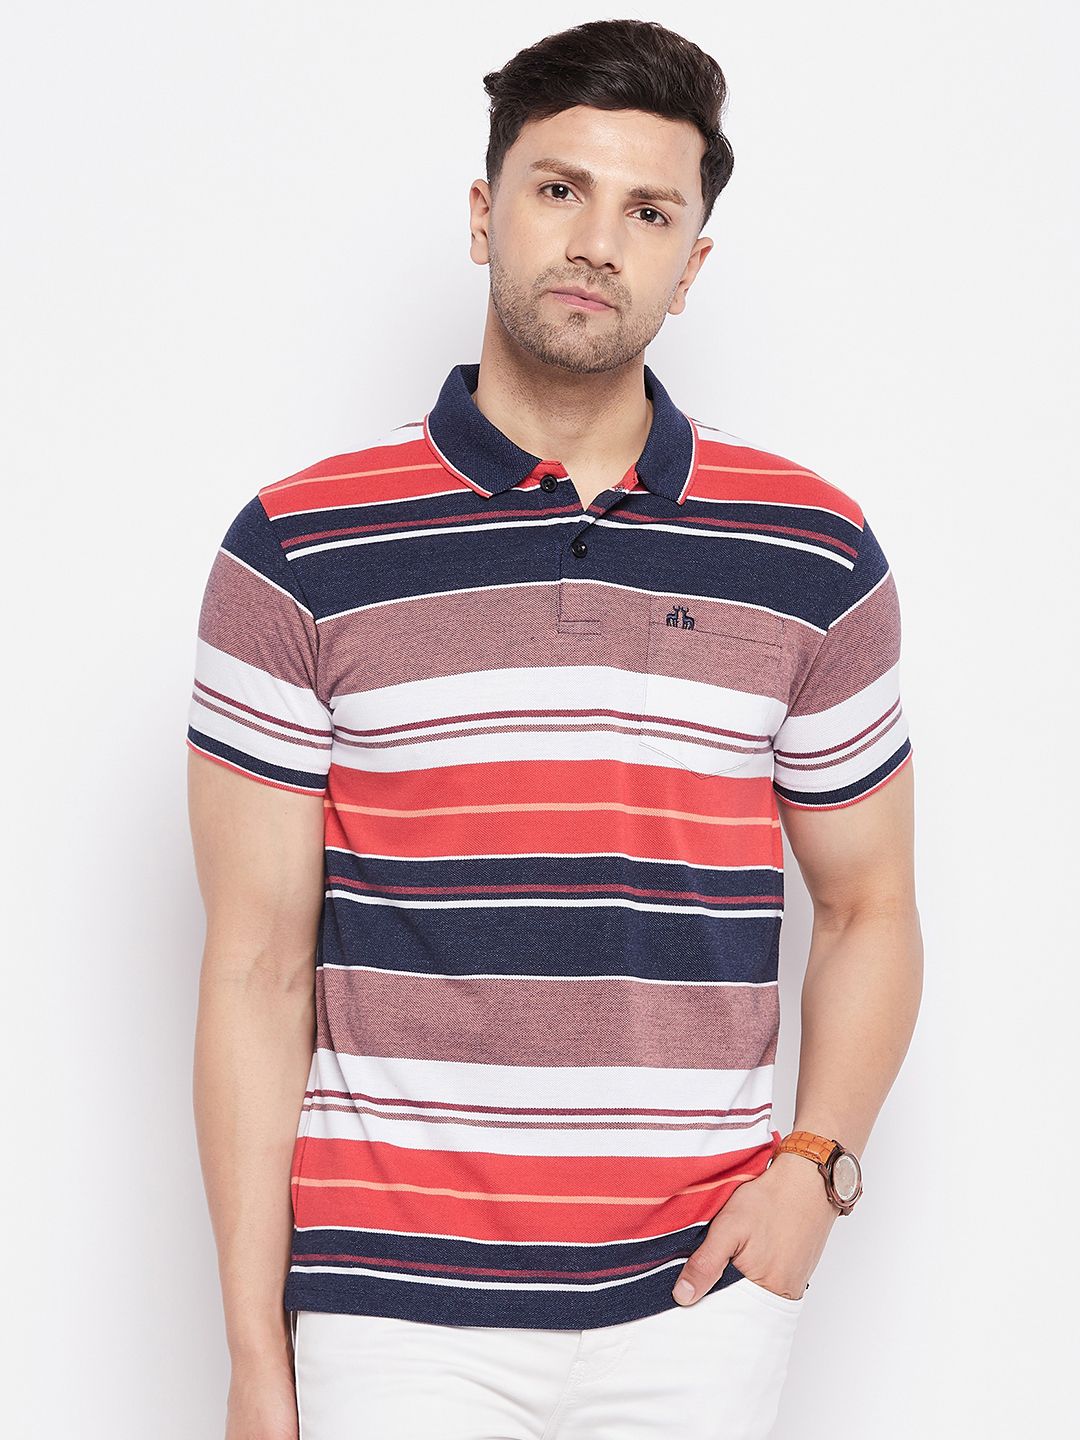     			98 Degree North - Multicolor Cotton Blend Regular Fit Men's Polo T Shirt ( Pack of 1 )